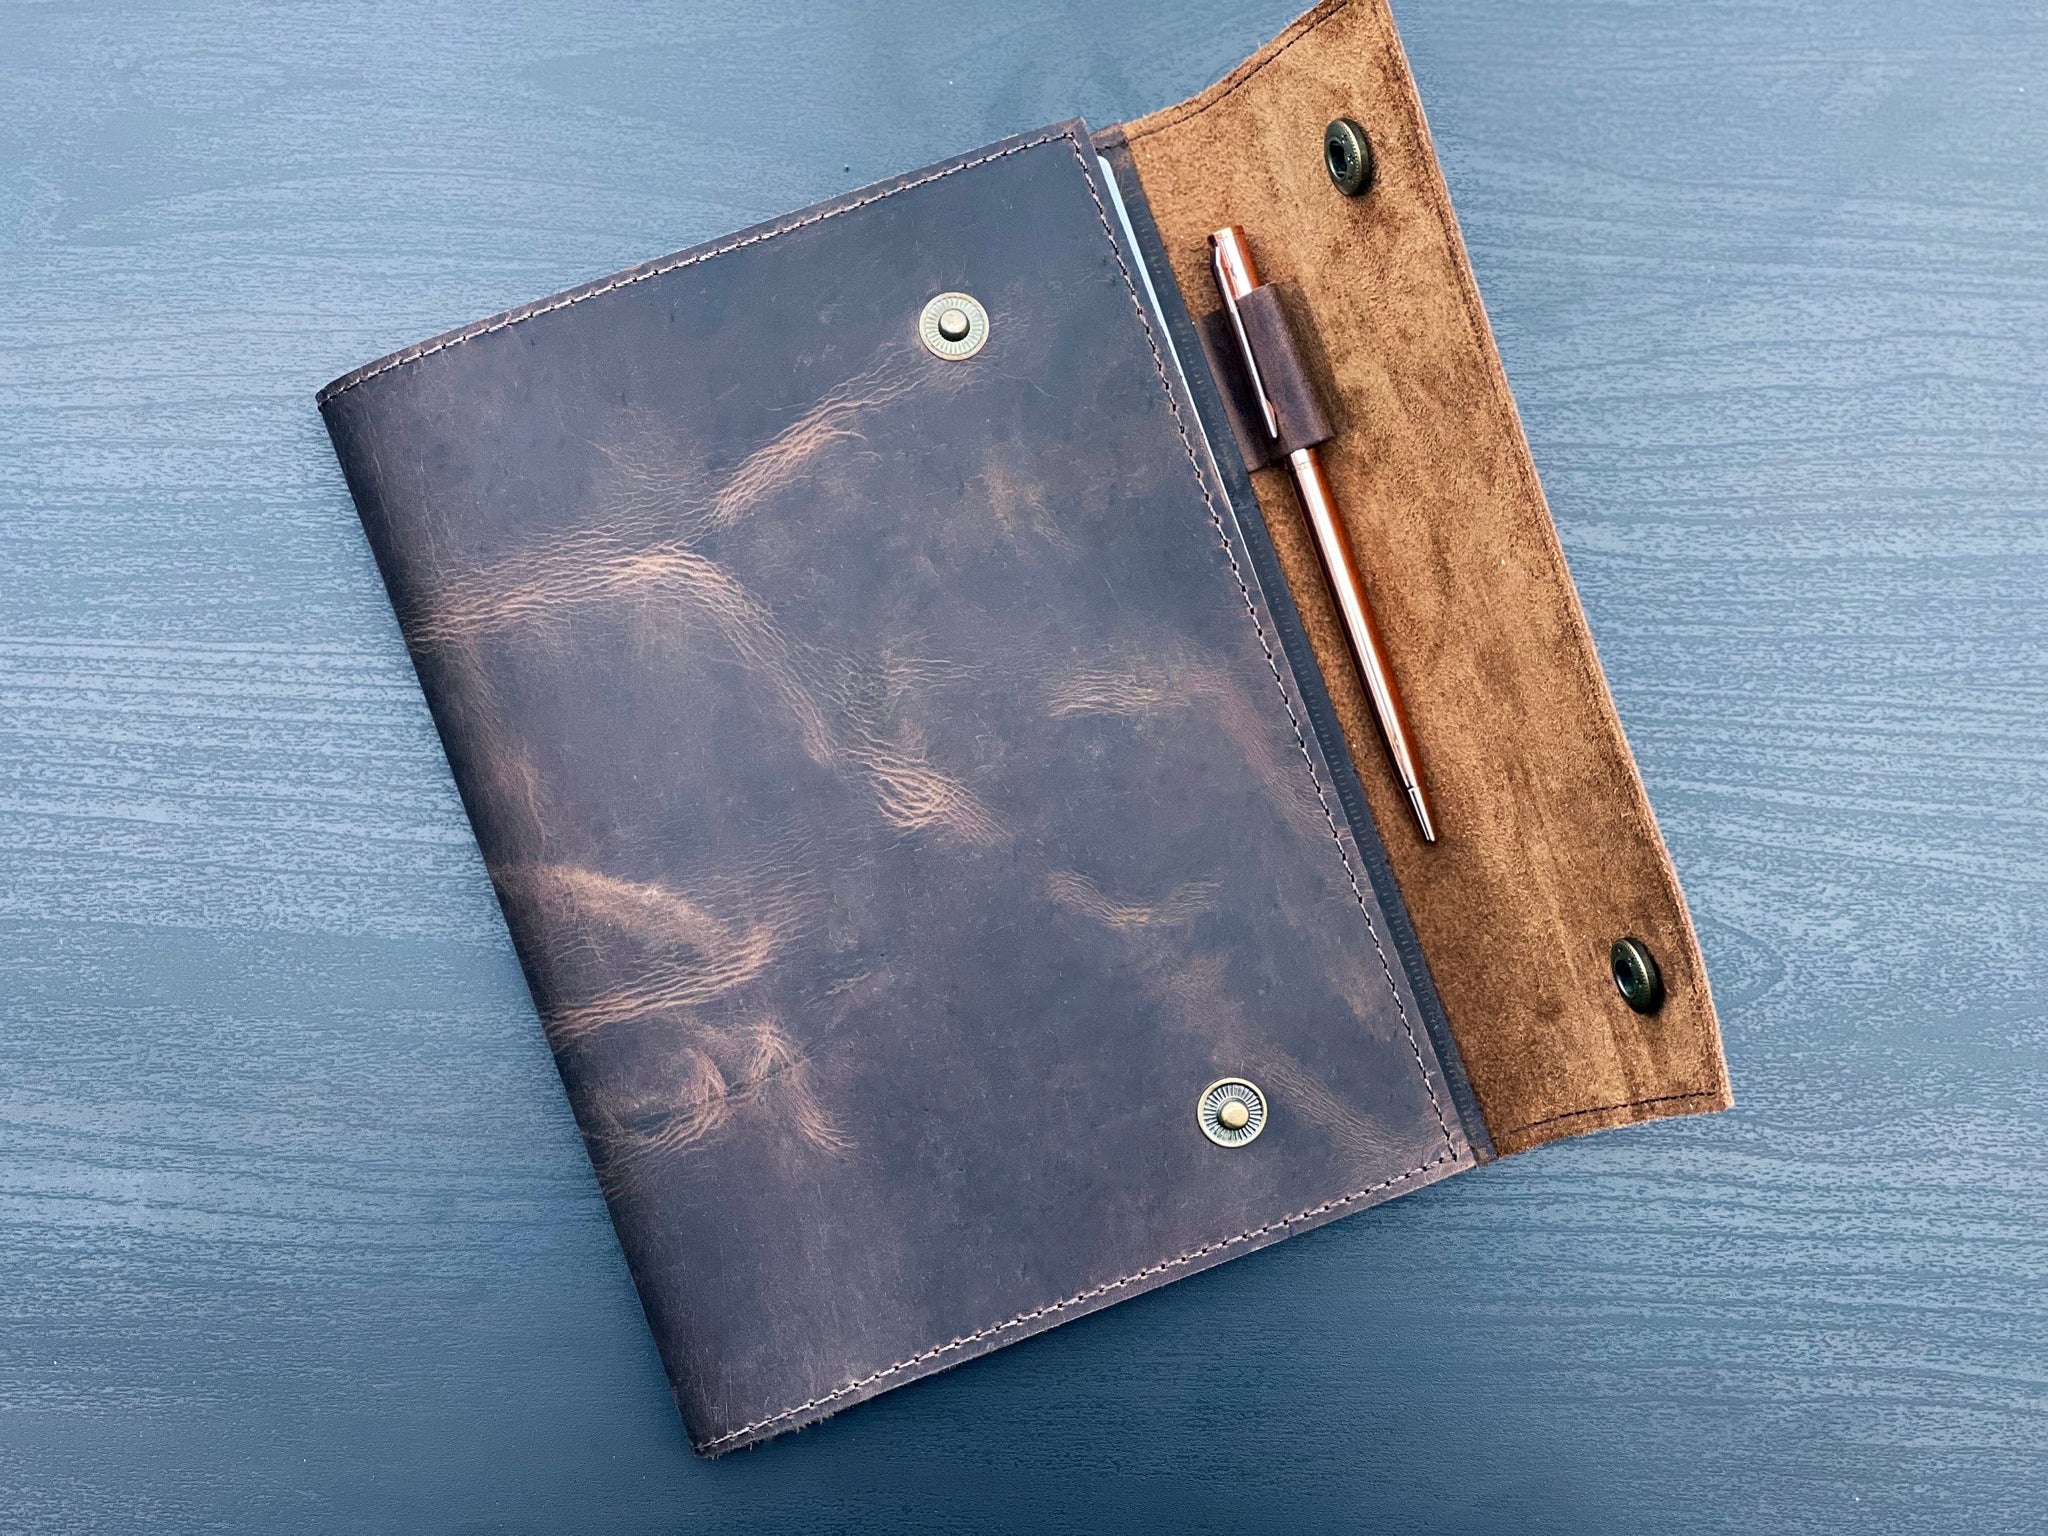 2024 Planner, Leather Planner Cover + Free Planner, Refillable Leather Planner, Personalized Planner, Christmas Gift, Business Gift